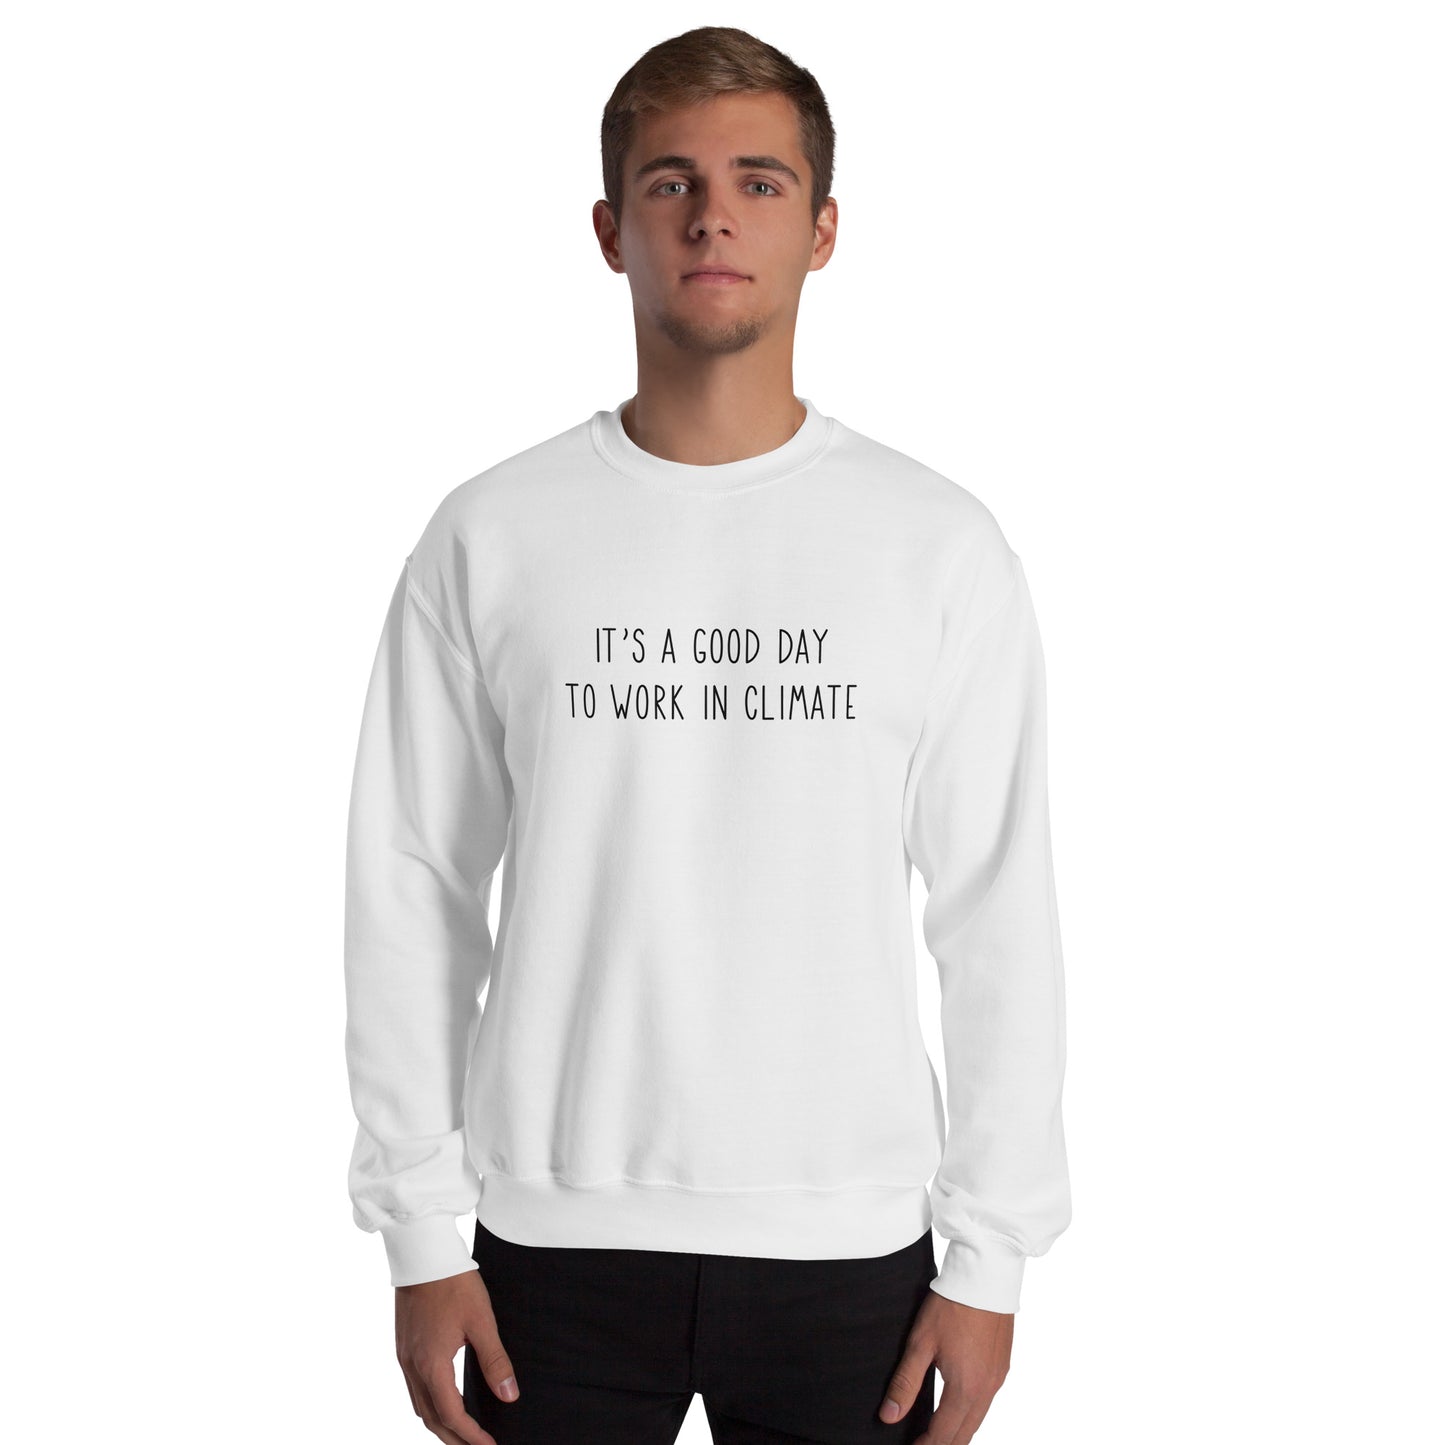 It's a good day to work in climate Unisex Sweatshirt